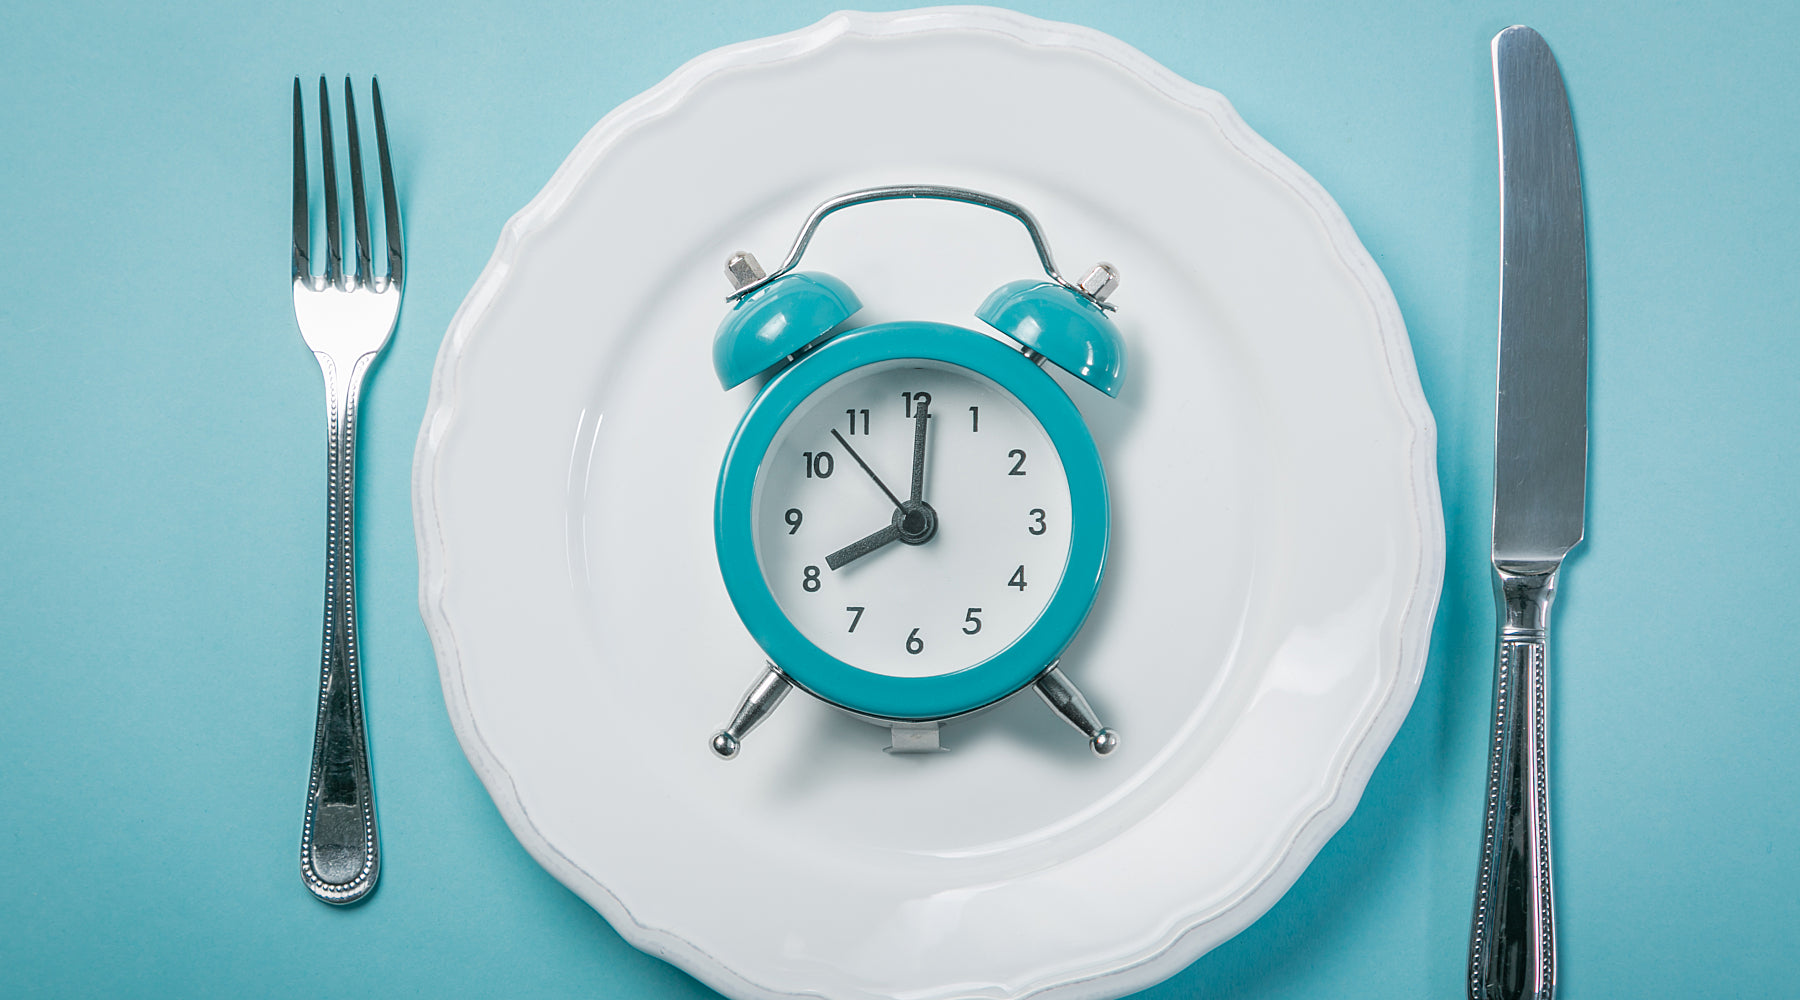 Fasting involves an eating and not eating time period